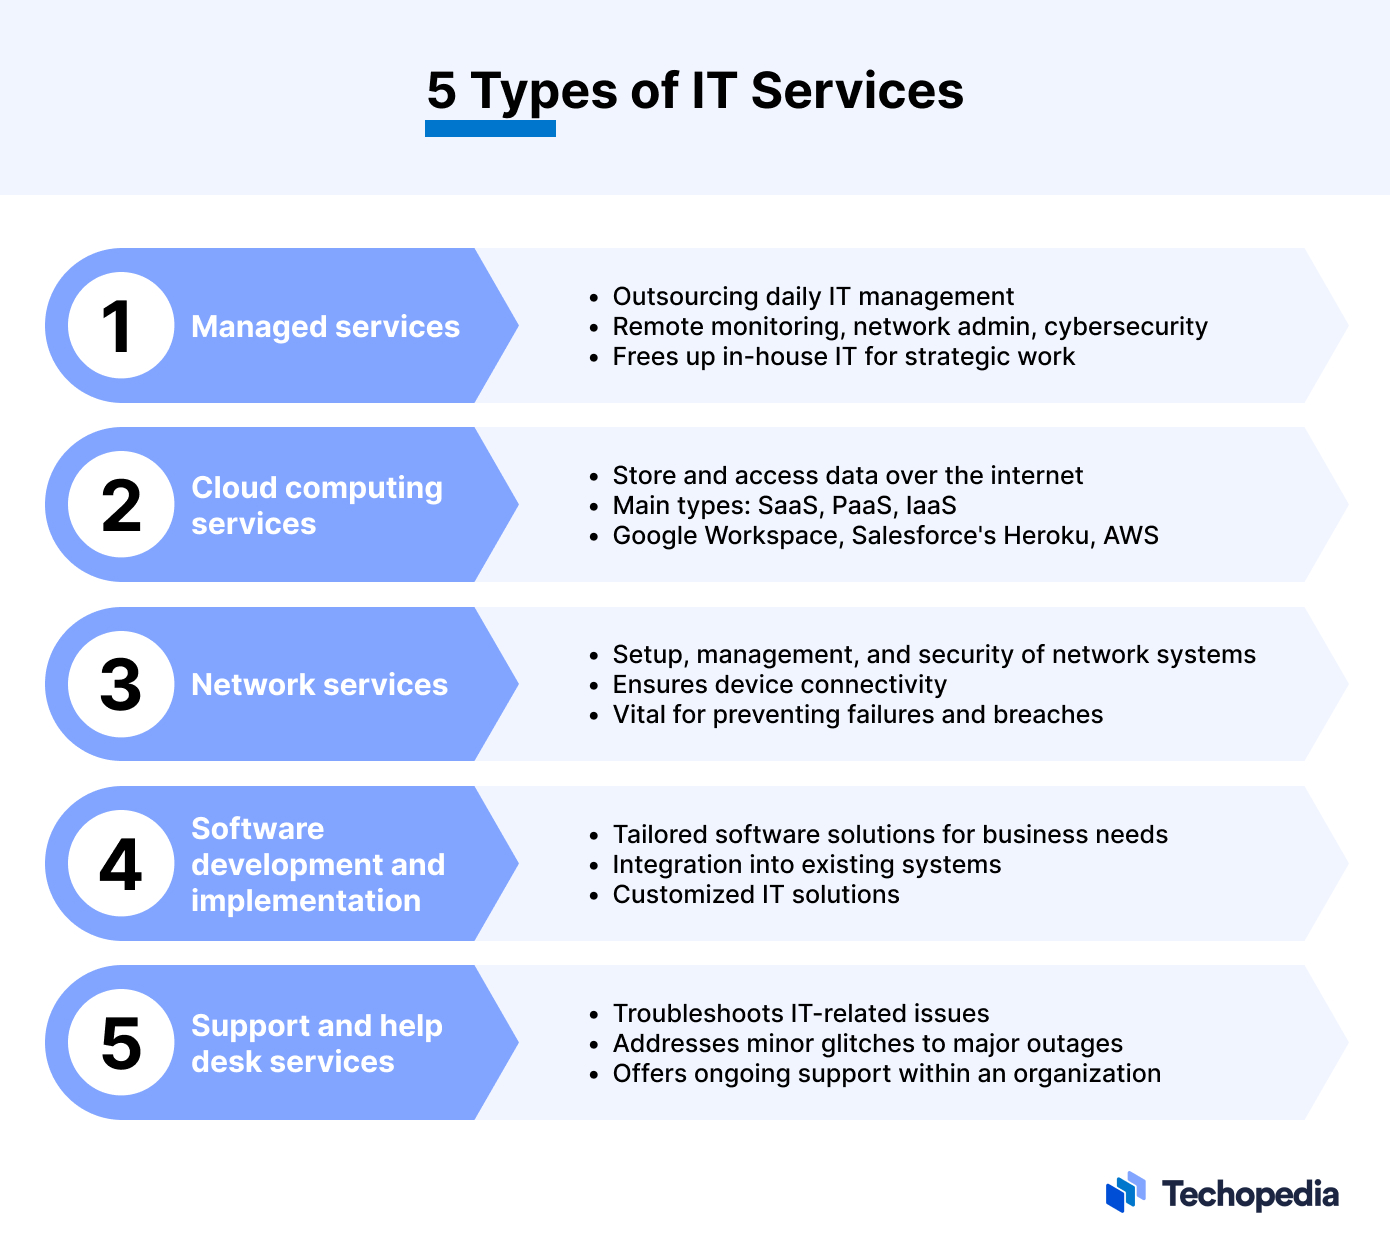 5 Types of IT Services